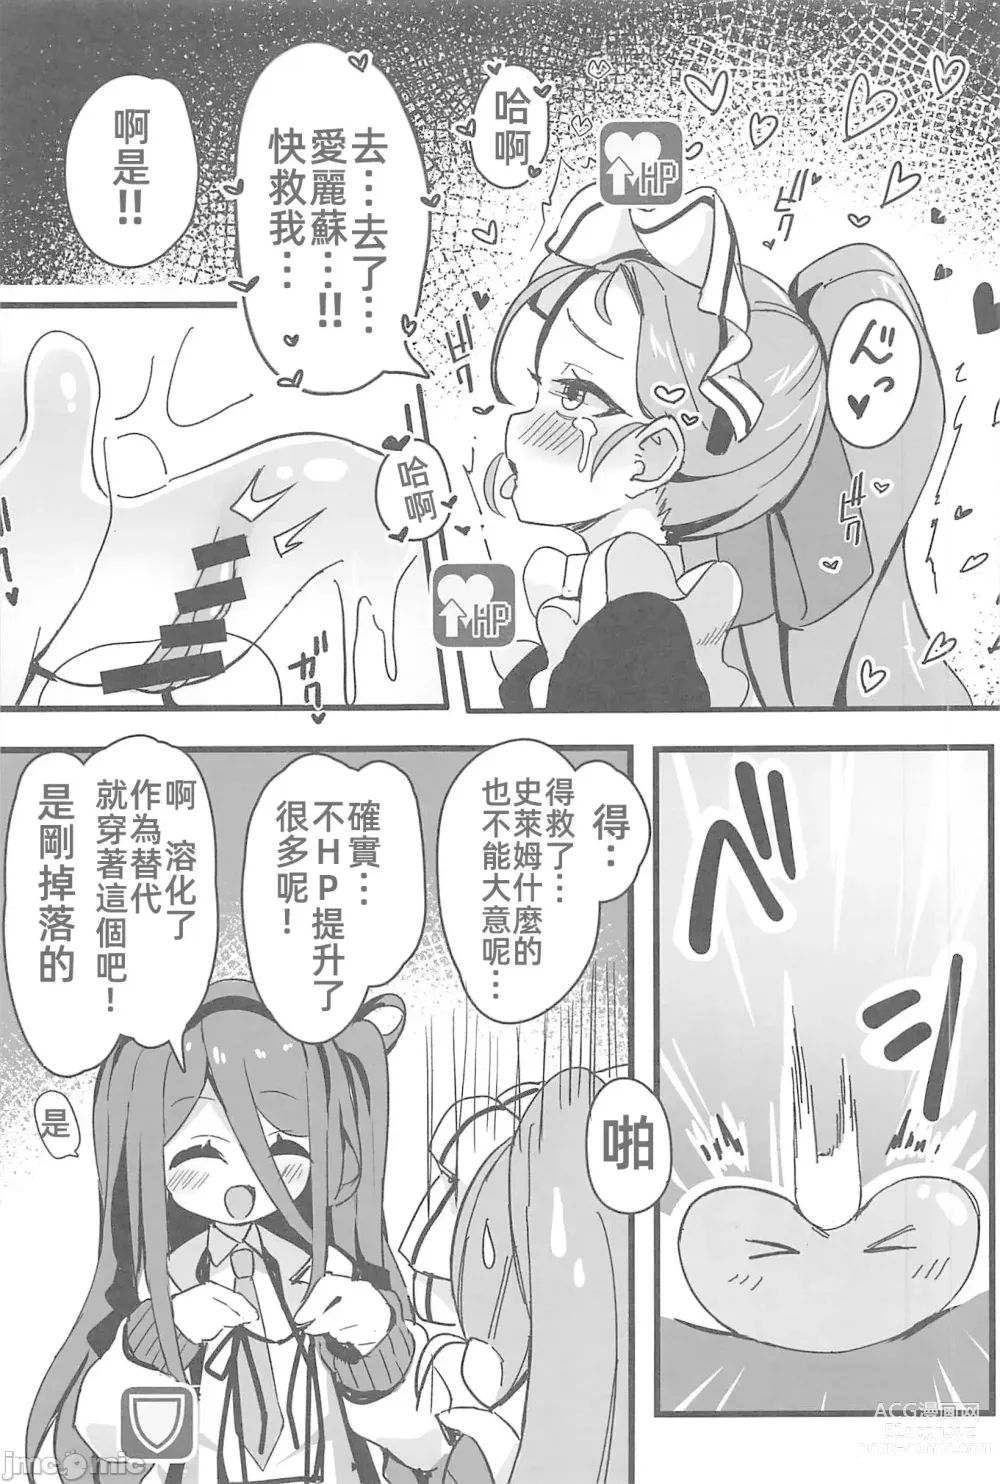 Page 8 of doujinshi 絕對要攻克給你看!!